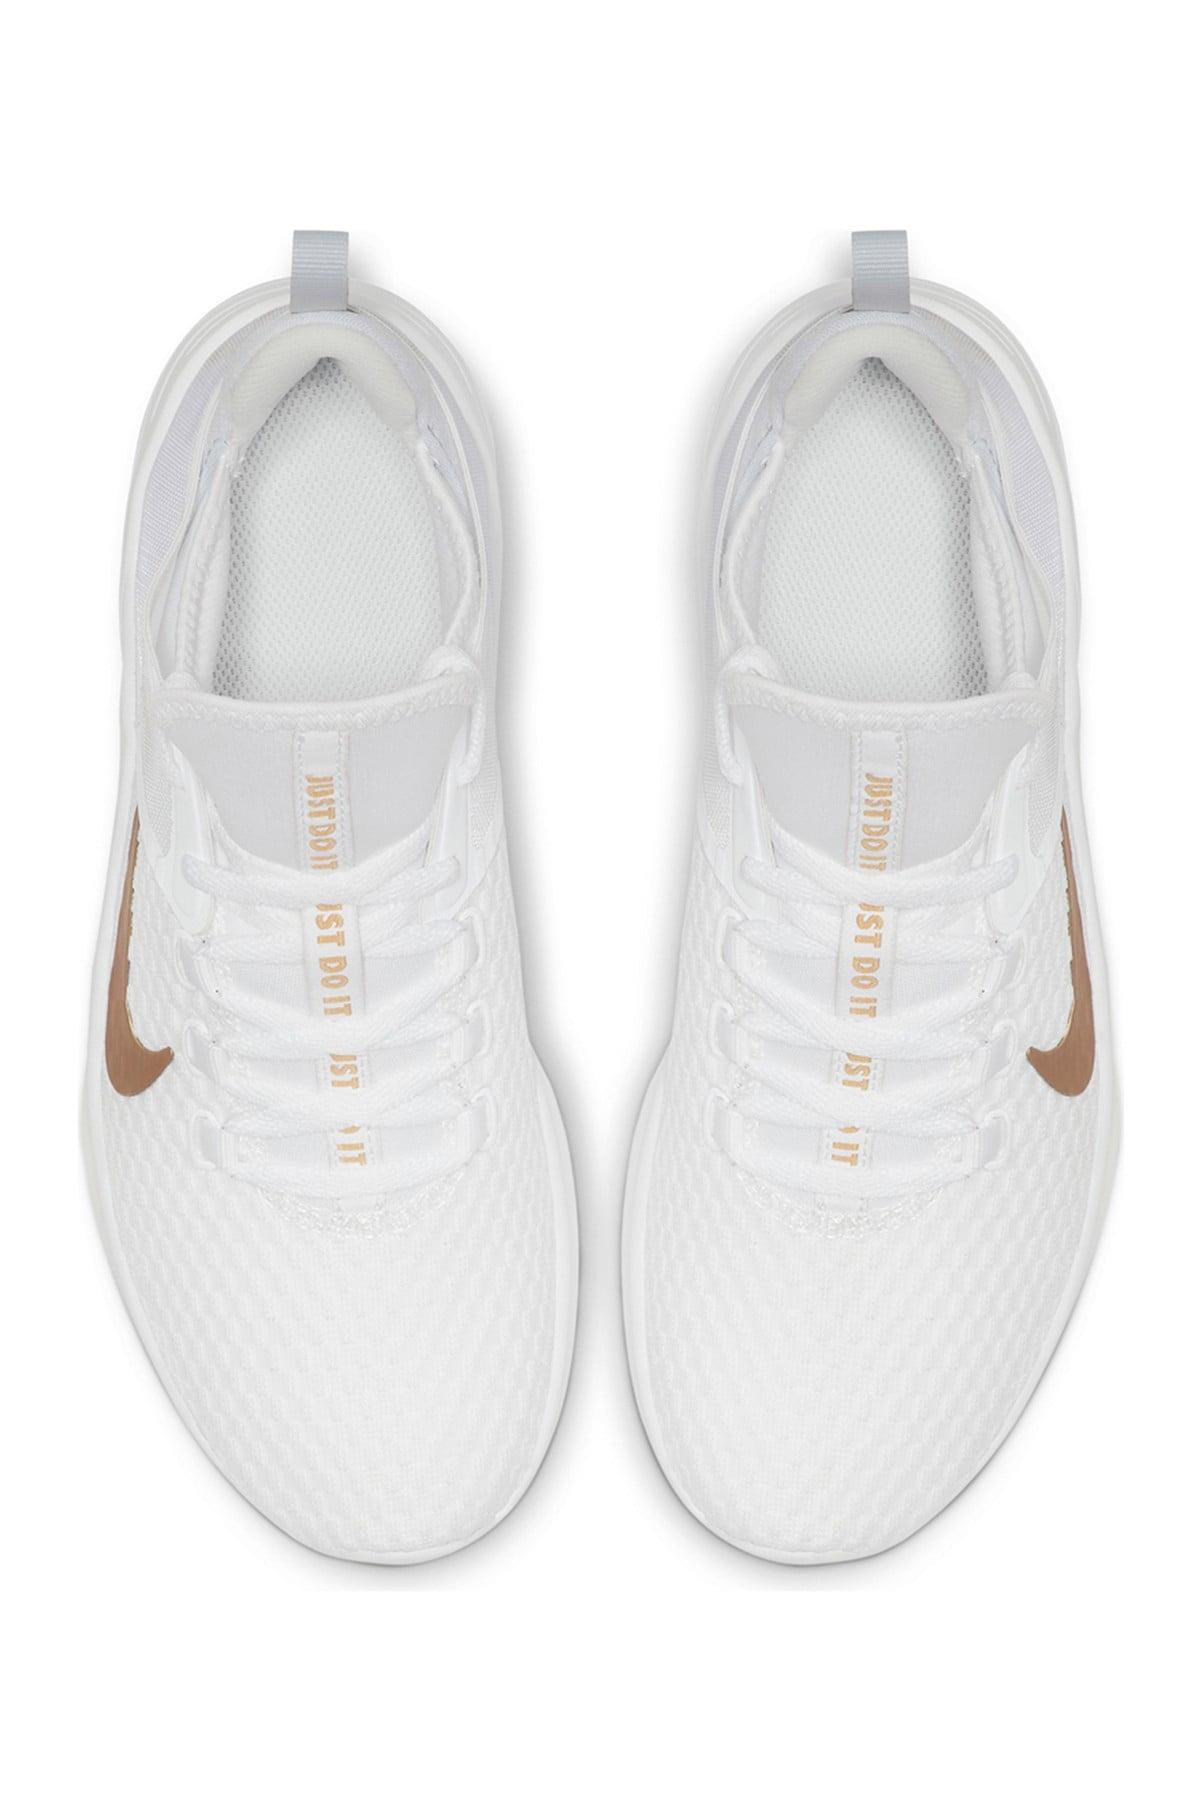 Nike Synthetic Air Max Bella Tr 2 Training Shoe in White/Metallic Gold  (White) - Lyst